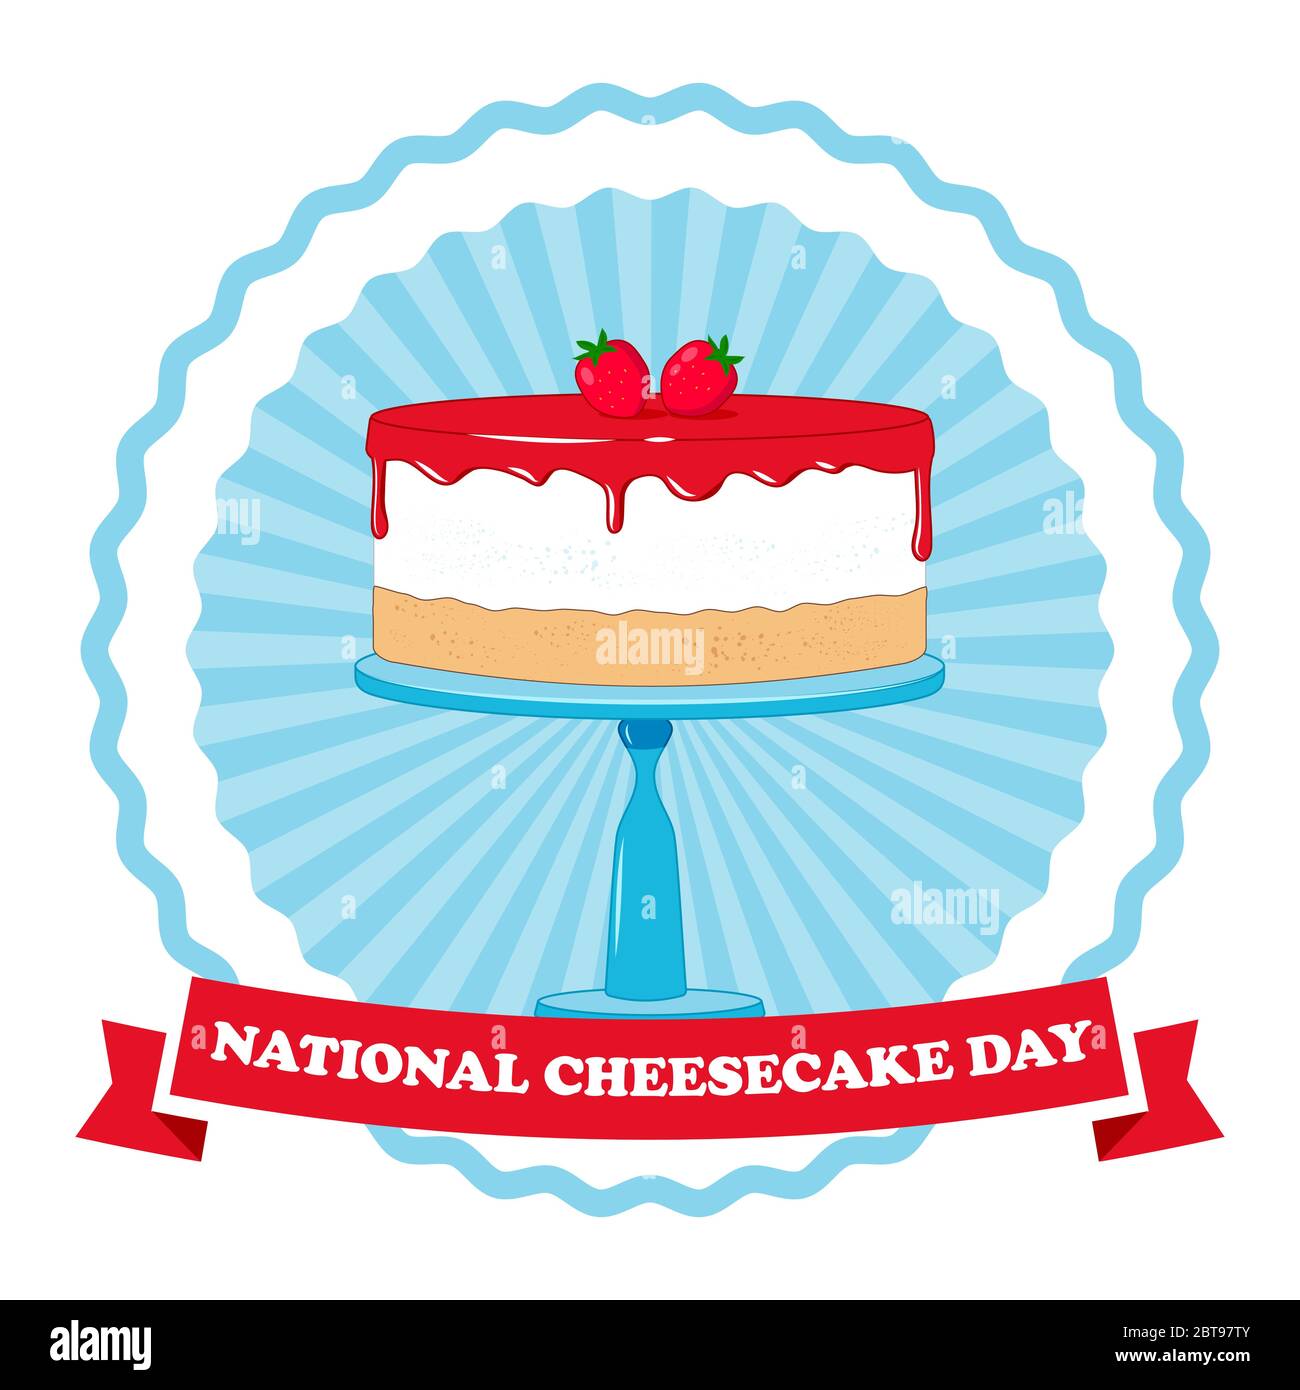 National Cheese Cake Day Vector Illustration. Cheesecake with strawberry toping. Stock Vector